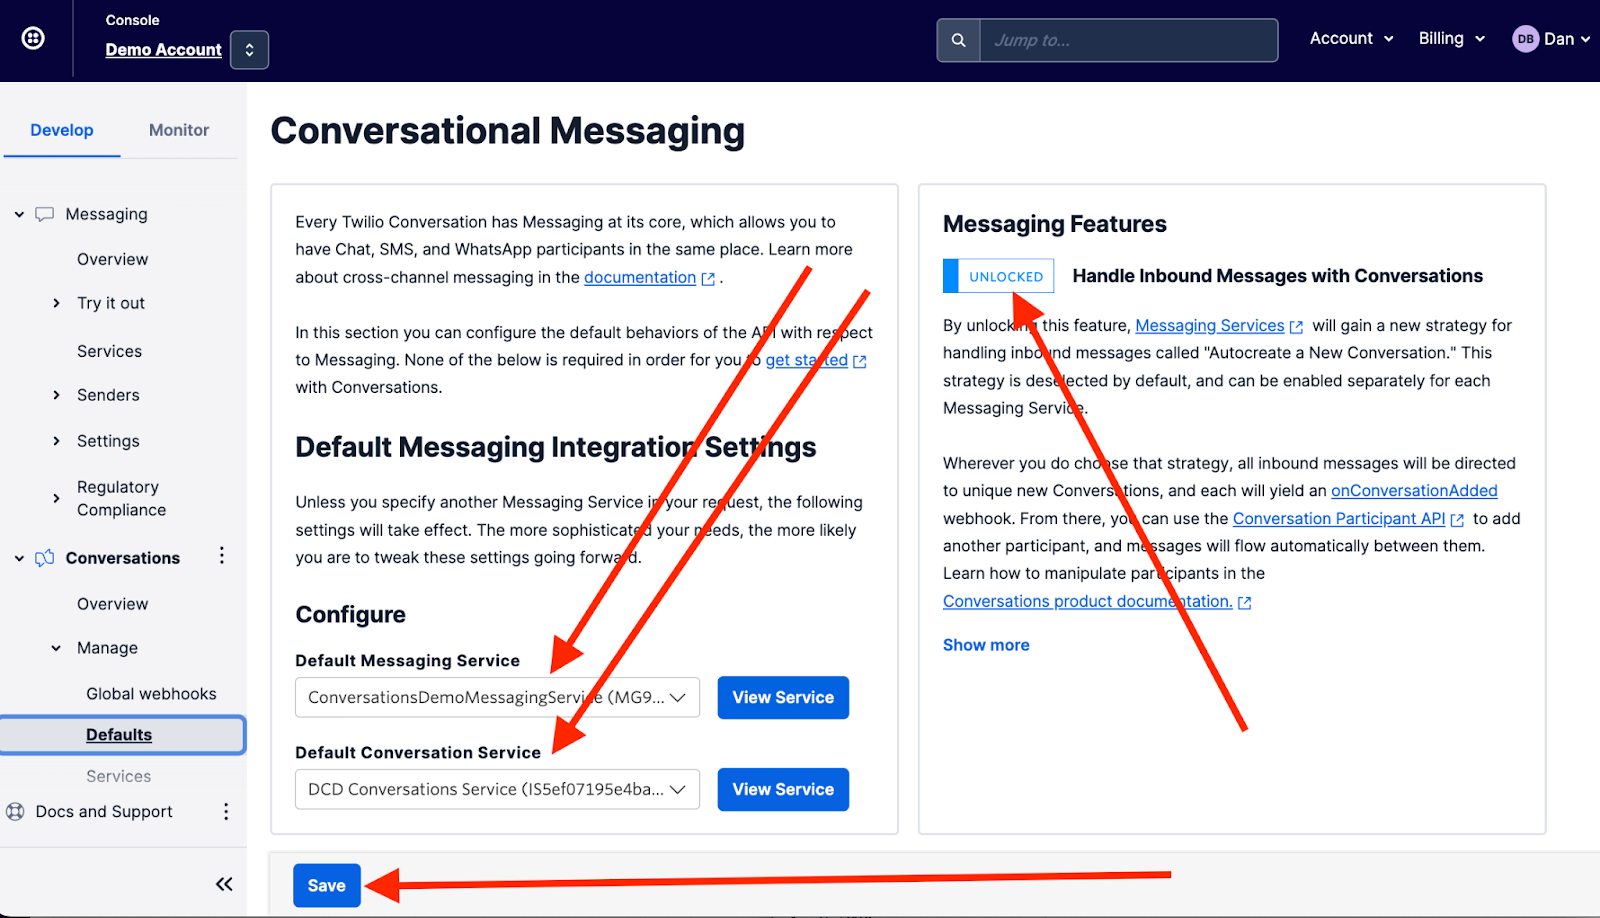 Handle inbound messages with Conversations setting